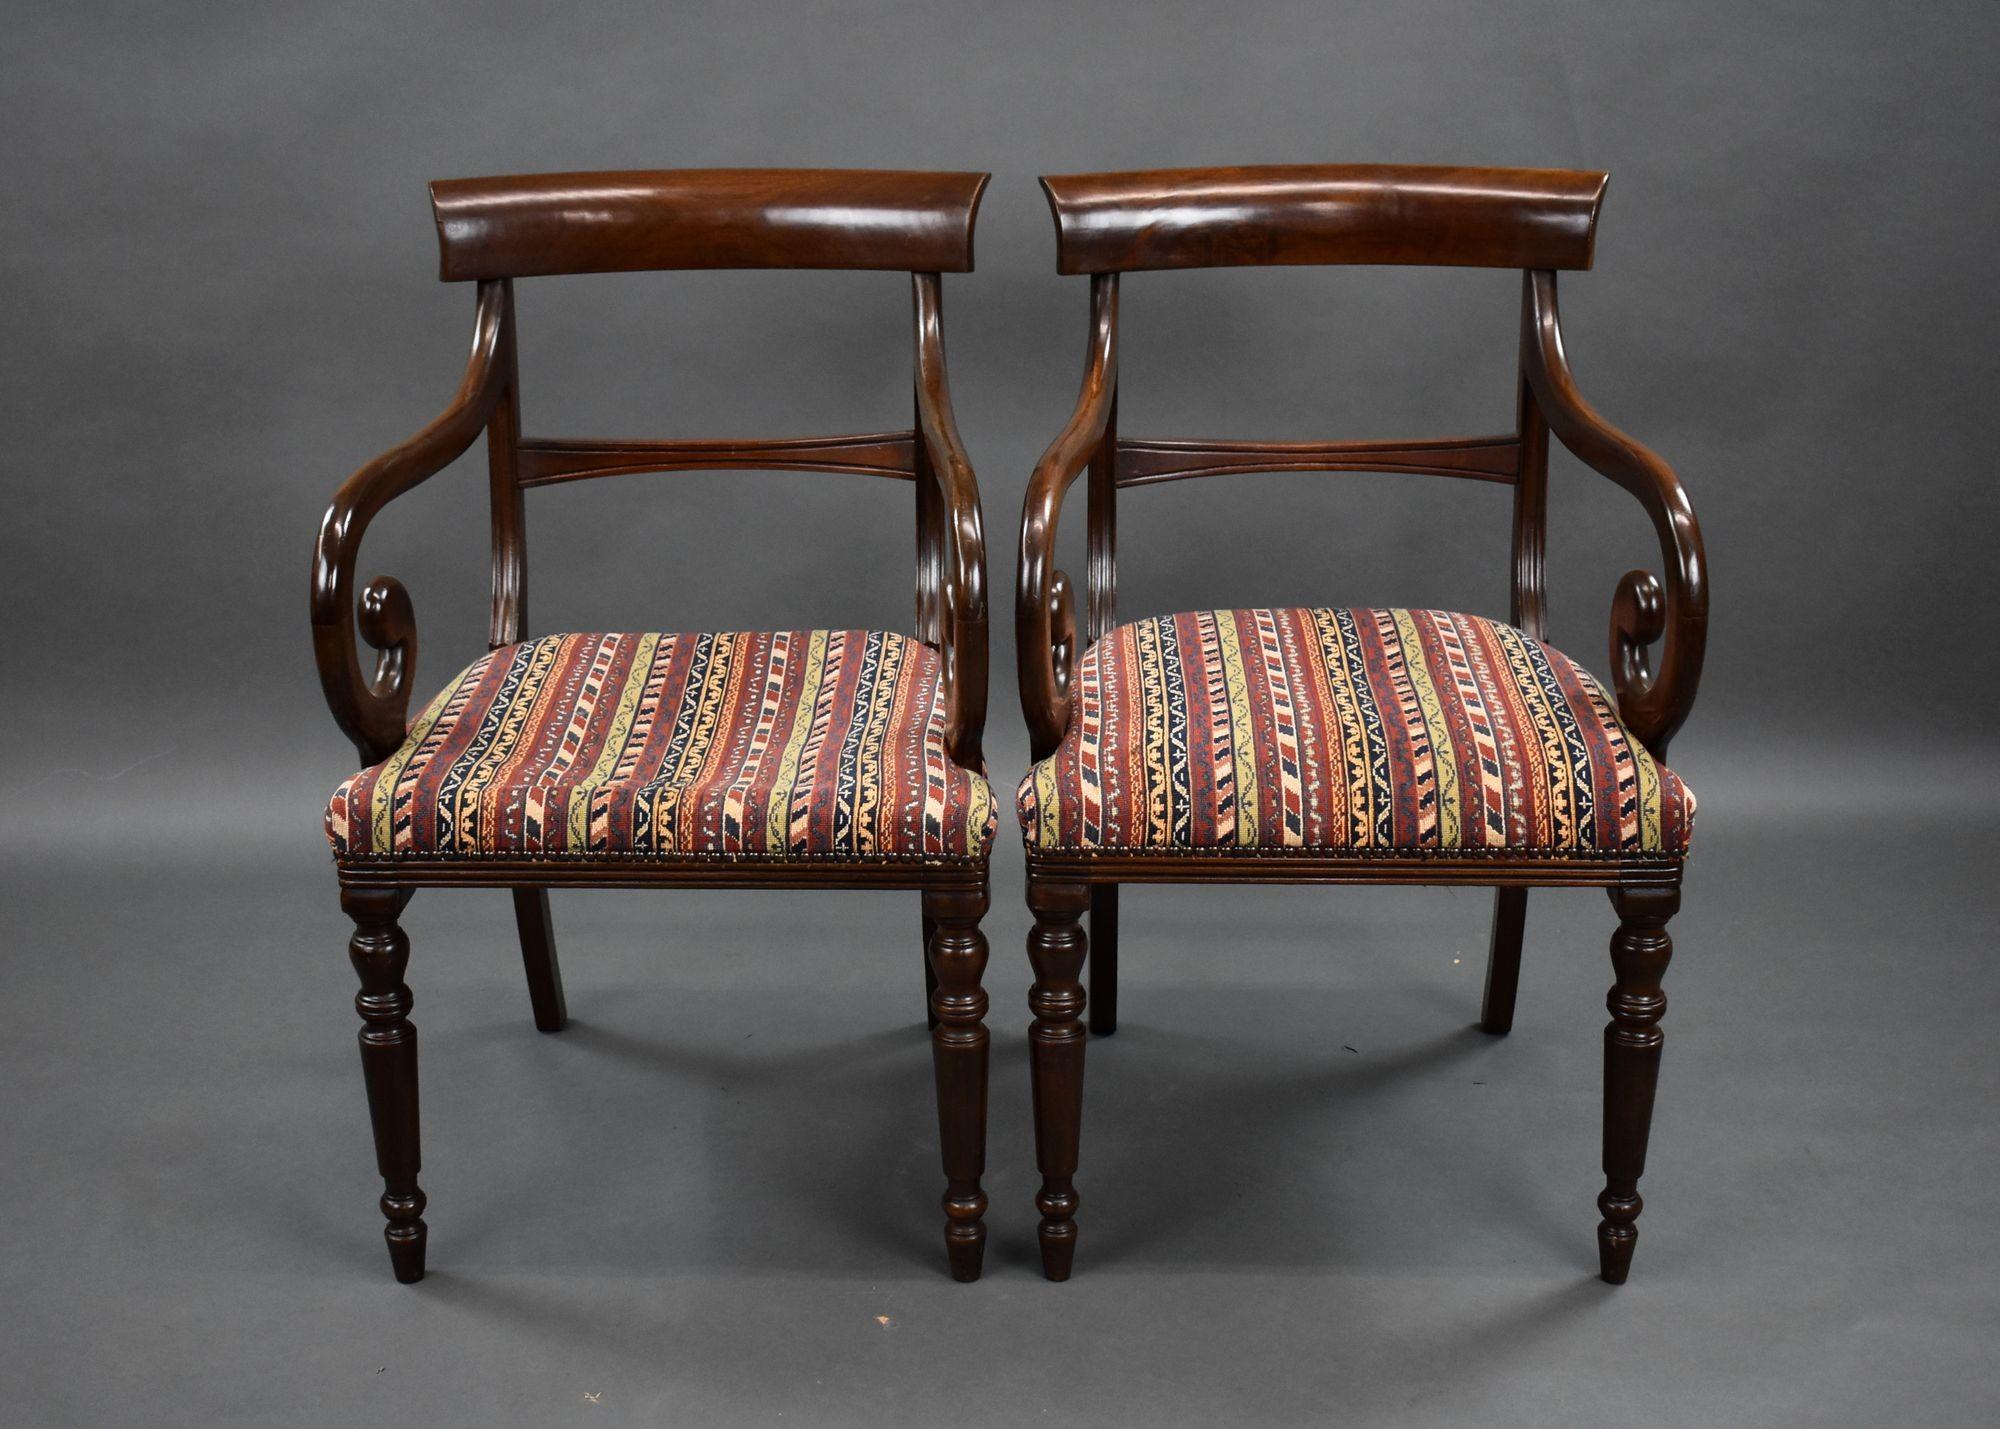 For sale is a pair of antique mahogany armchairs, both remaining in very good condition in their age. Both seat covers are in good order but one chair would benefit from being re-stuffed.
Width: 54cm Depth: 54cm Height: 88cm